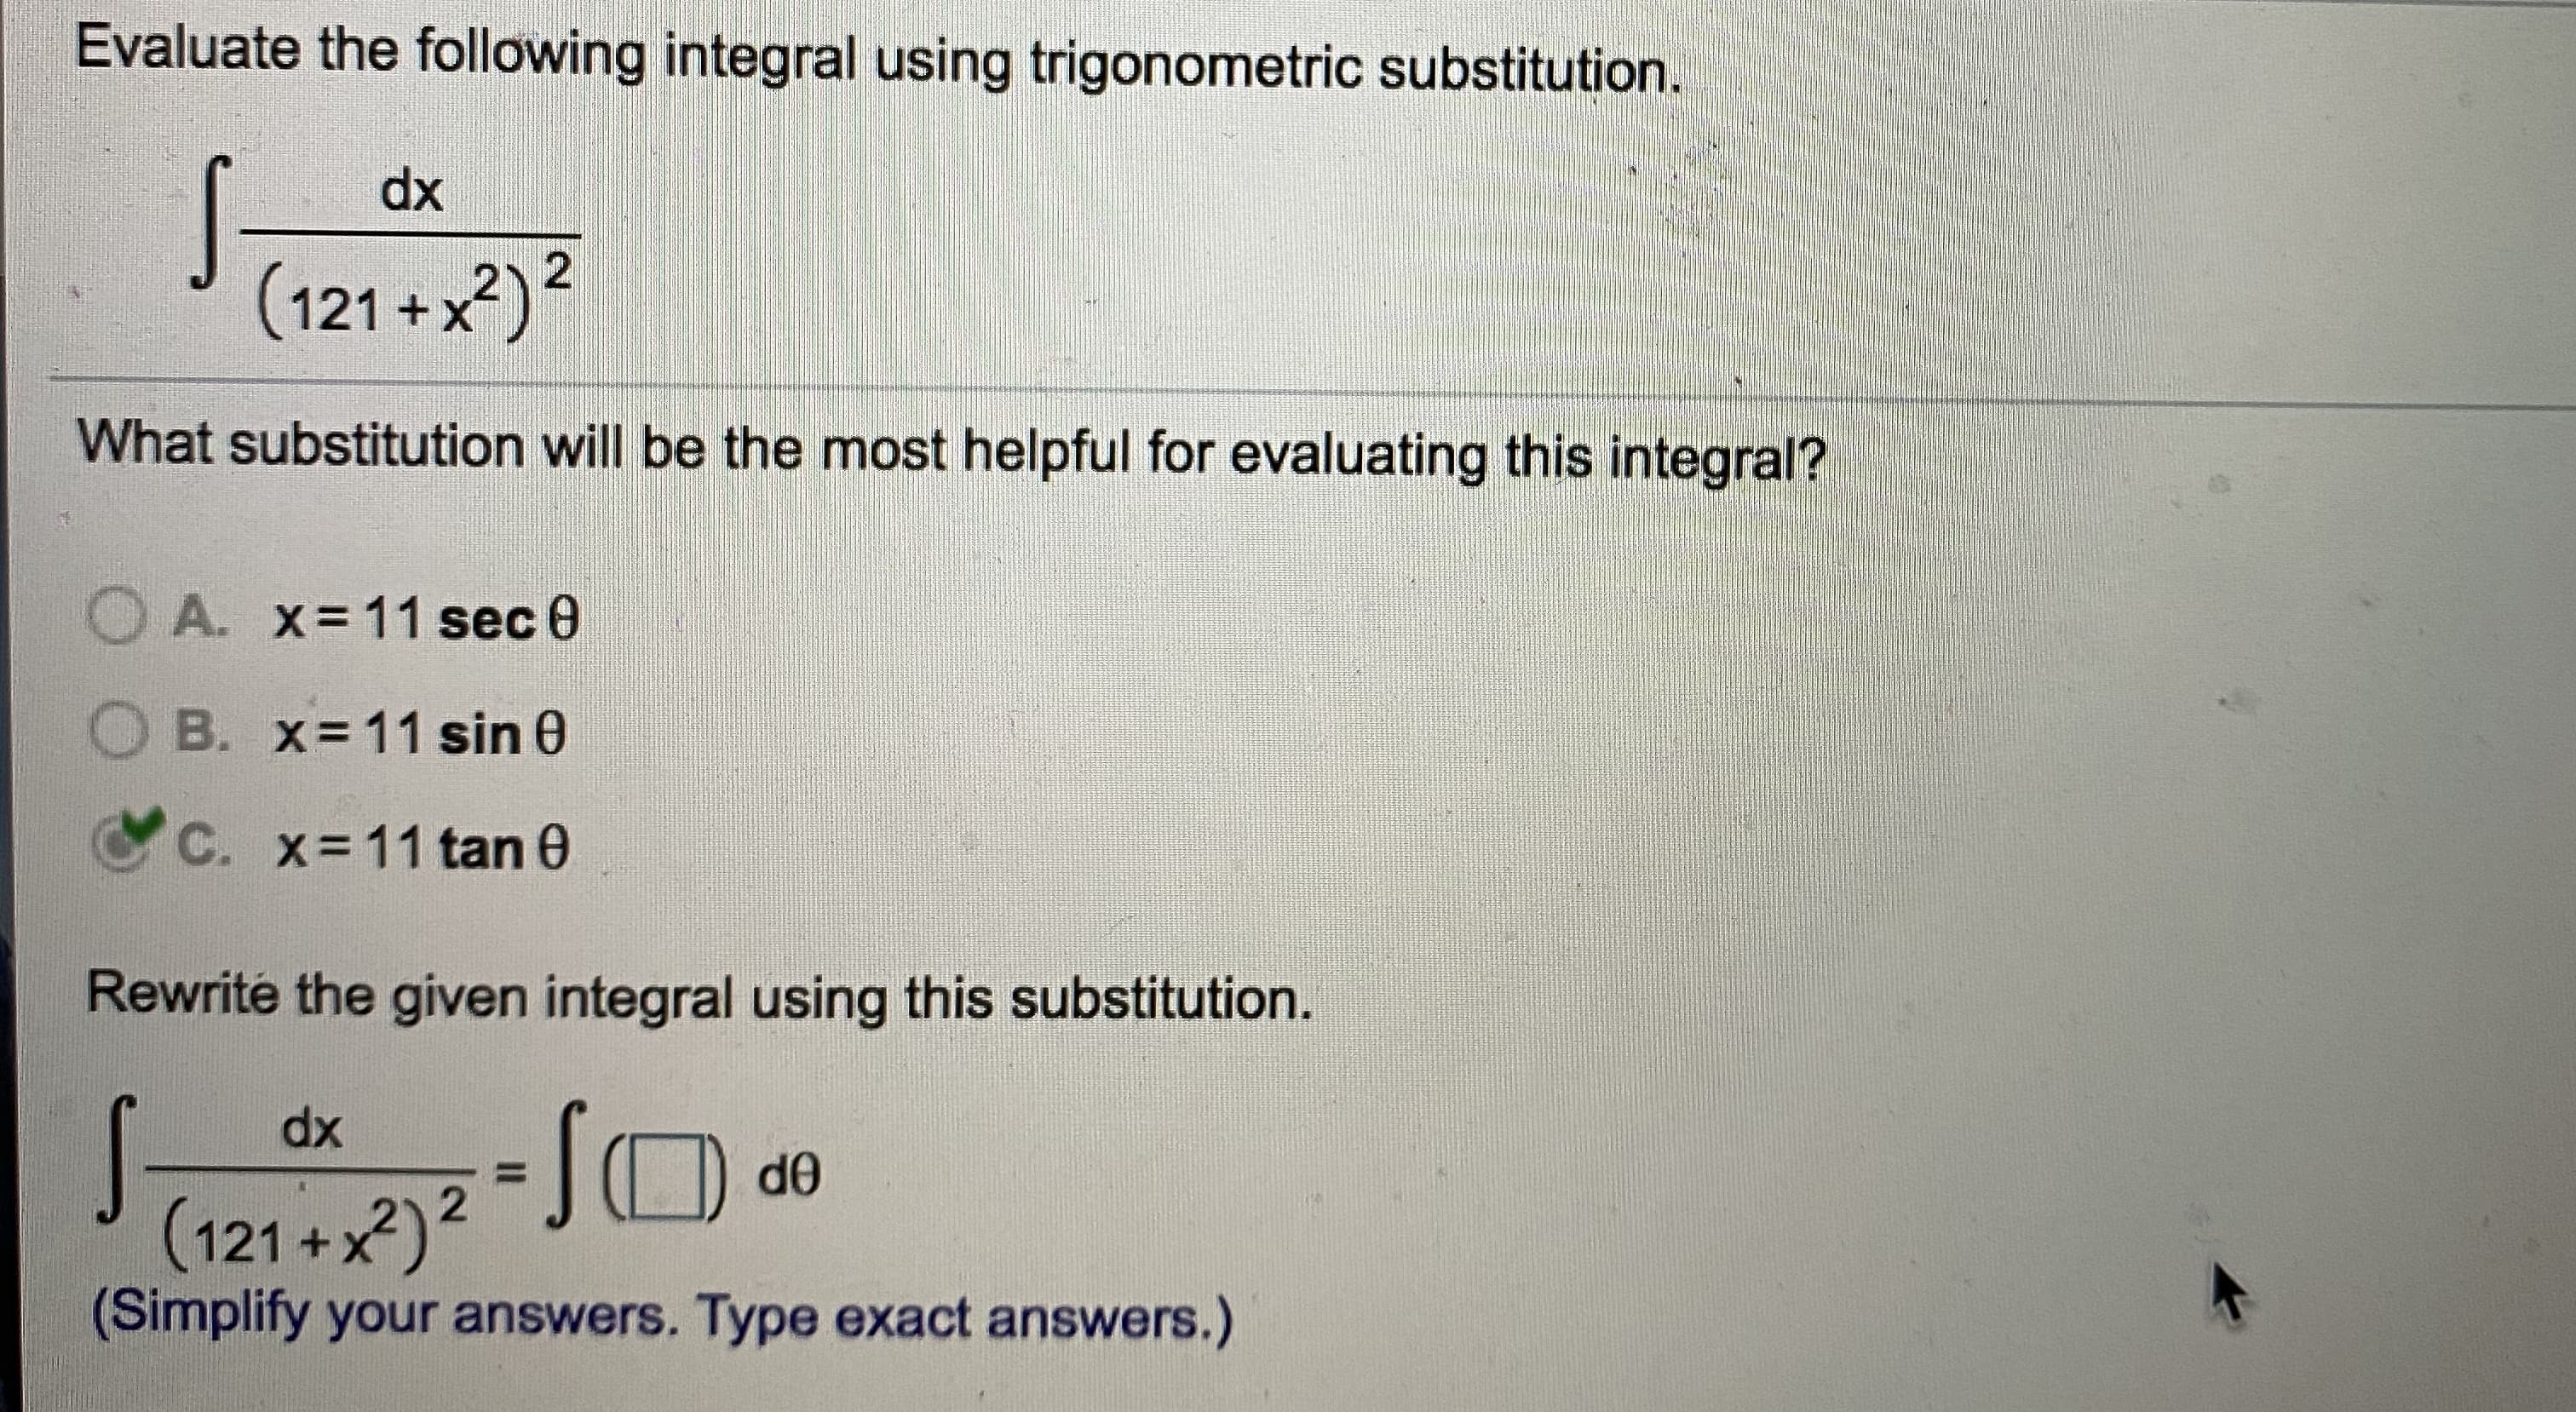 Evaluate the following integral using trigonometric substitution.
